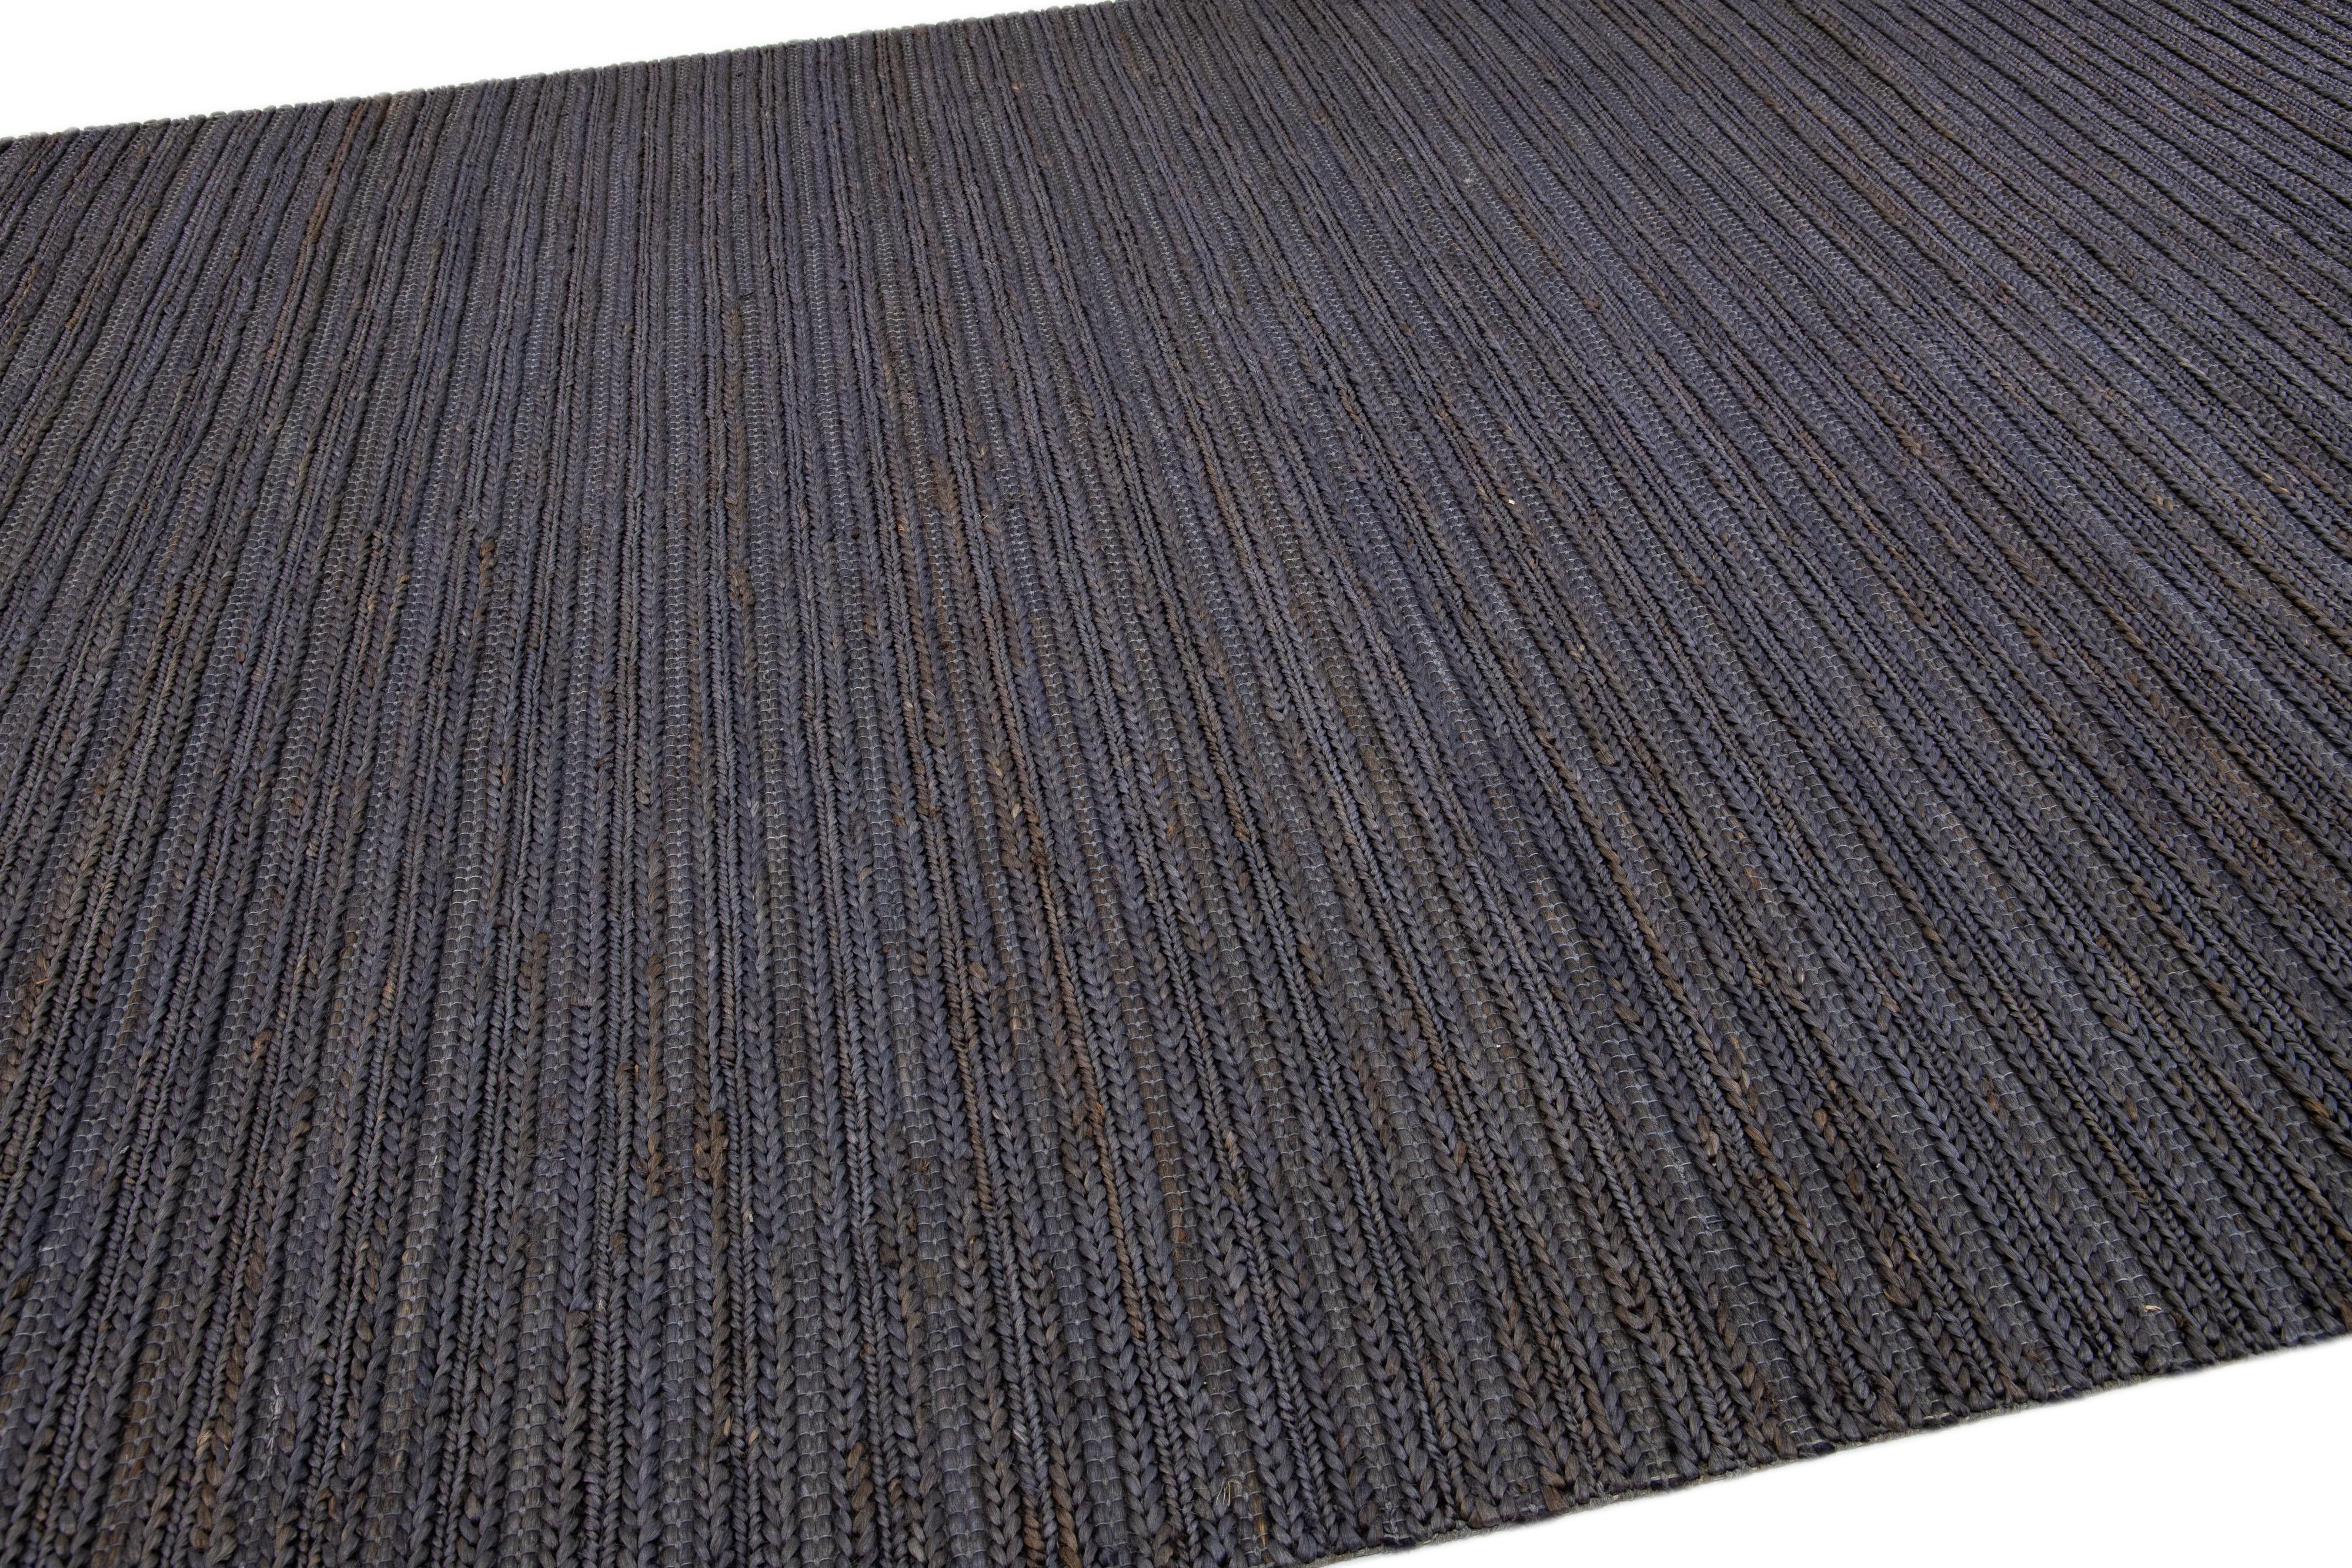 Beaded Modern Natural Texture Hand Woven Jute & Cotton Area Rug with Grey-Onyx Color For Sale